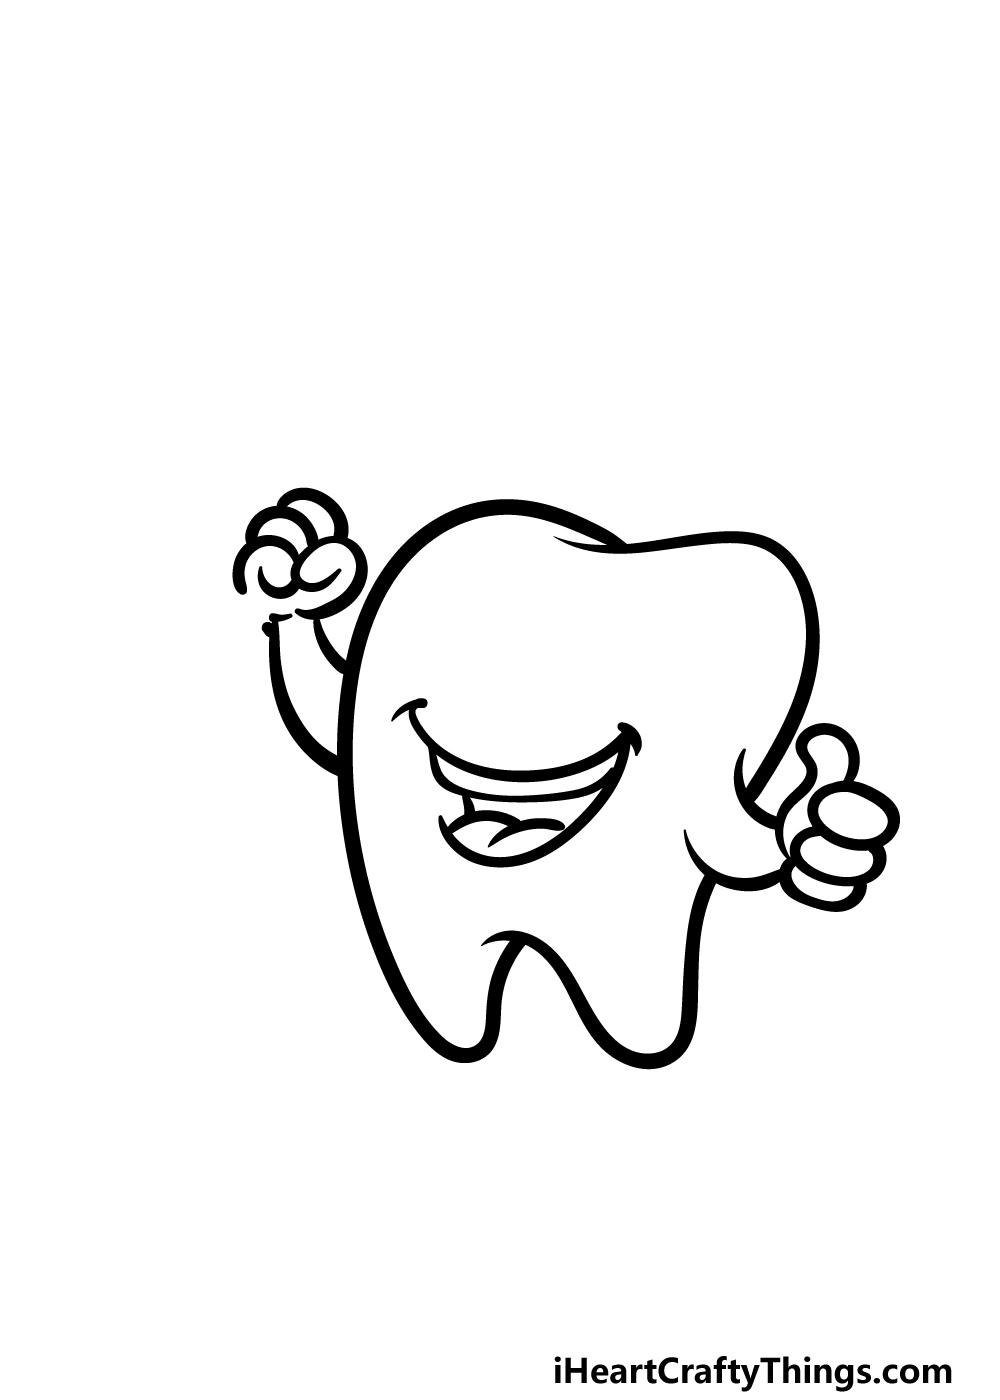 Cartoon Tooth Drawing - How To Draw A Cartoon Tooth Step By Step